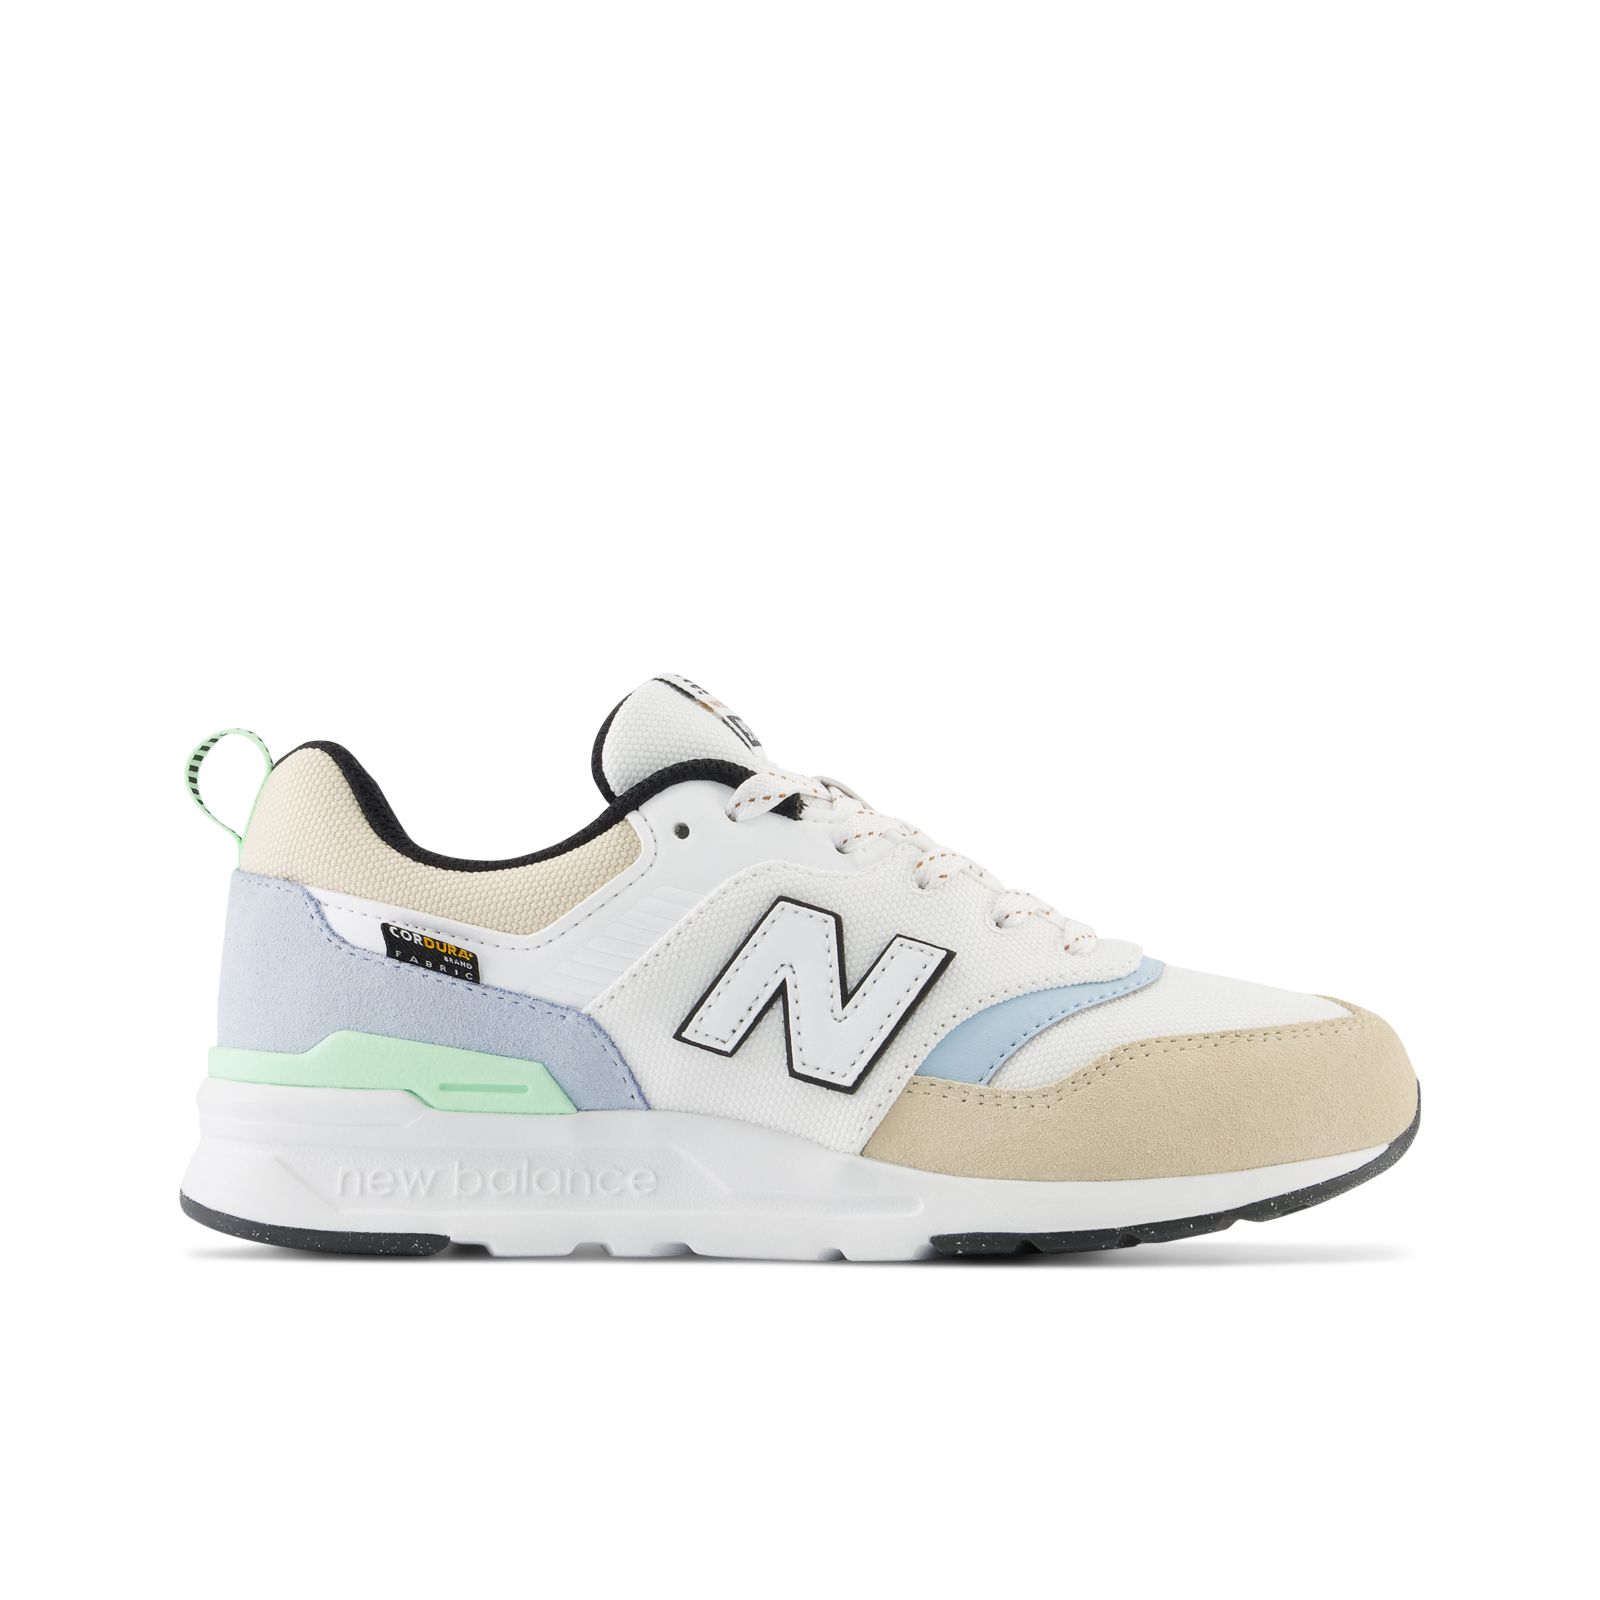 New Balance 997h Outfit | atelier-yuwa.ciao.jp